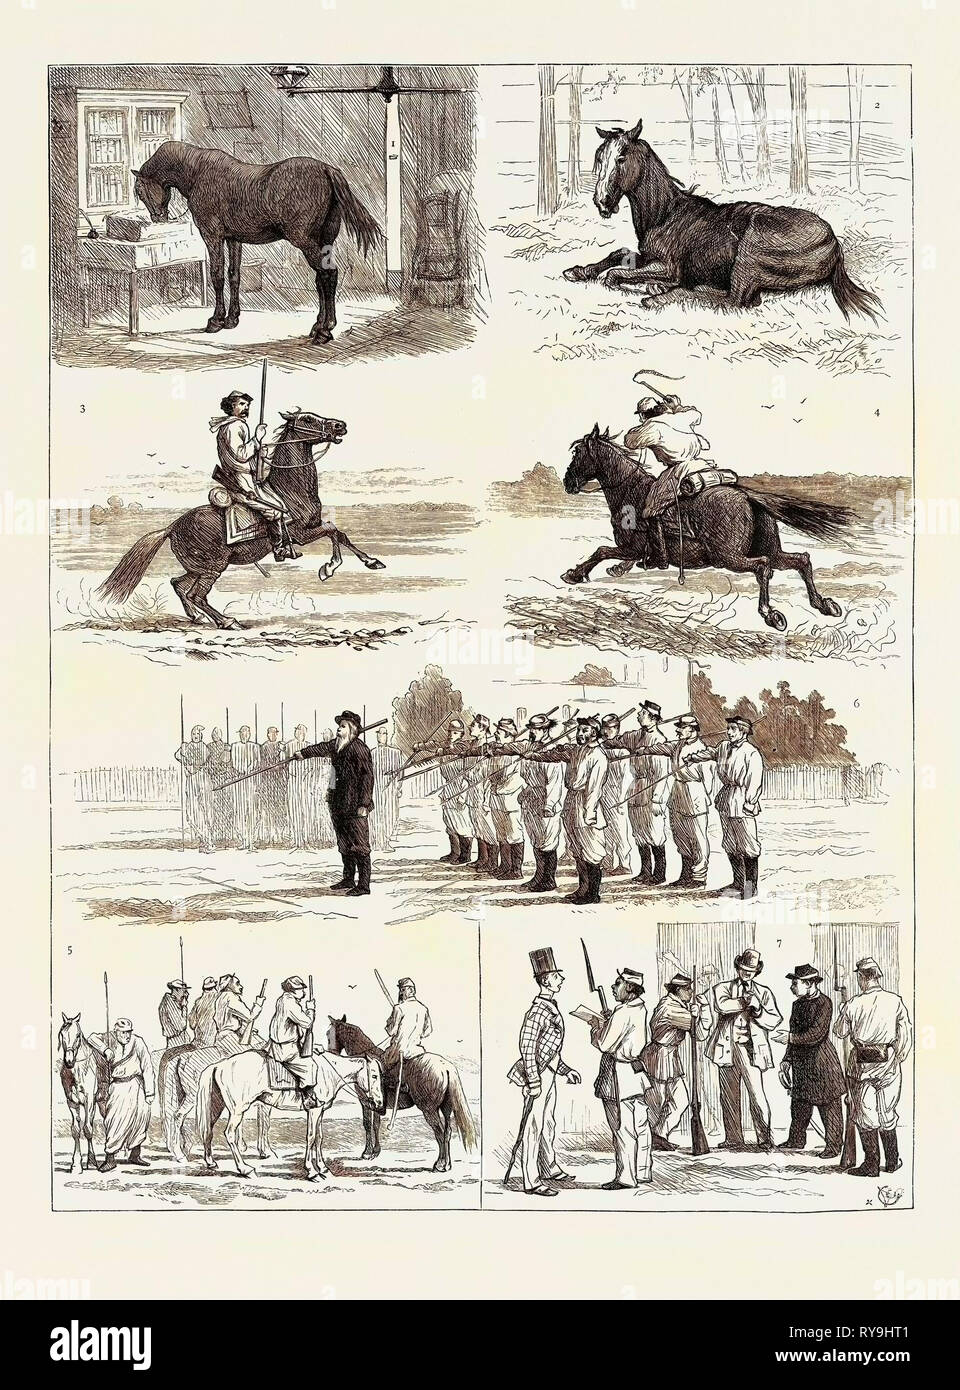 The Recent Revolution in the Argentine Confederation, Sketches in Buenos Ayres 1. Stabled in His Owner's Study to Avoid Seizure. 2. An Exempted Veteran. 3. A National Guard Before the Battle. 4. A National Guard after the Battle. 5. Scouts on the Look-Out for the Enemy. 6. Lance Drill. 7. 'Su Papeleta?' (' Where is Your Certificate of Nationality Stock Photo